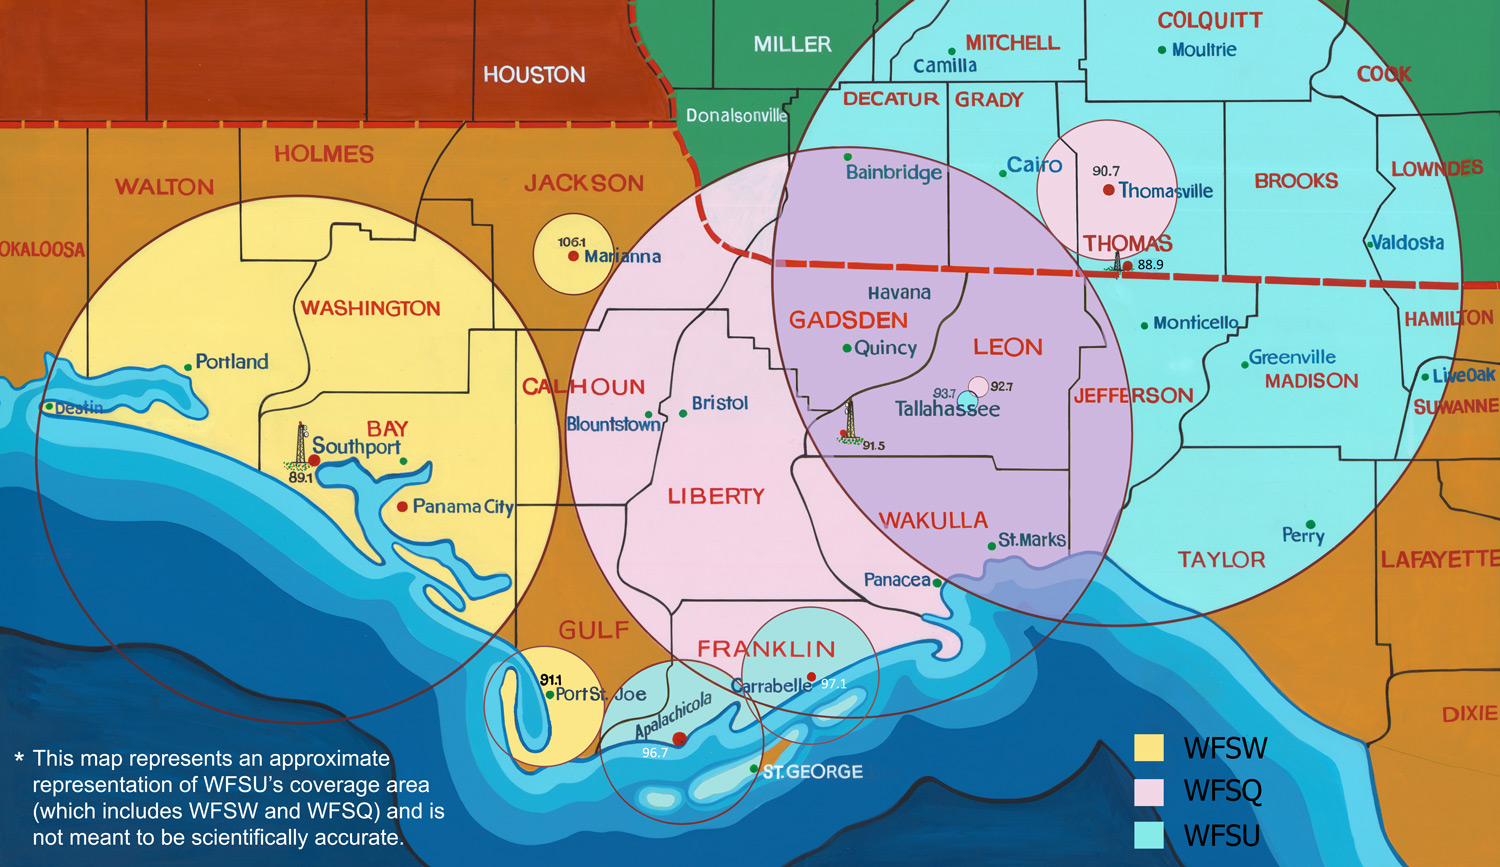 An artist's rendering of the WFSU FM coverage area showing a map of NW Florida with overlaid circles.